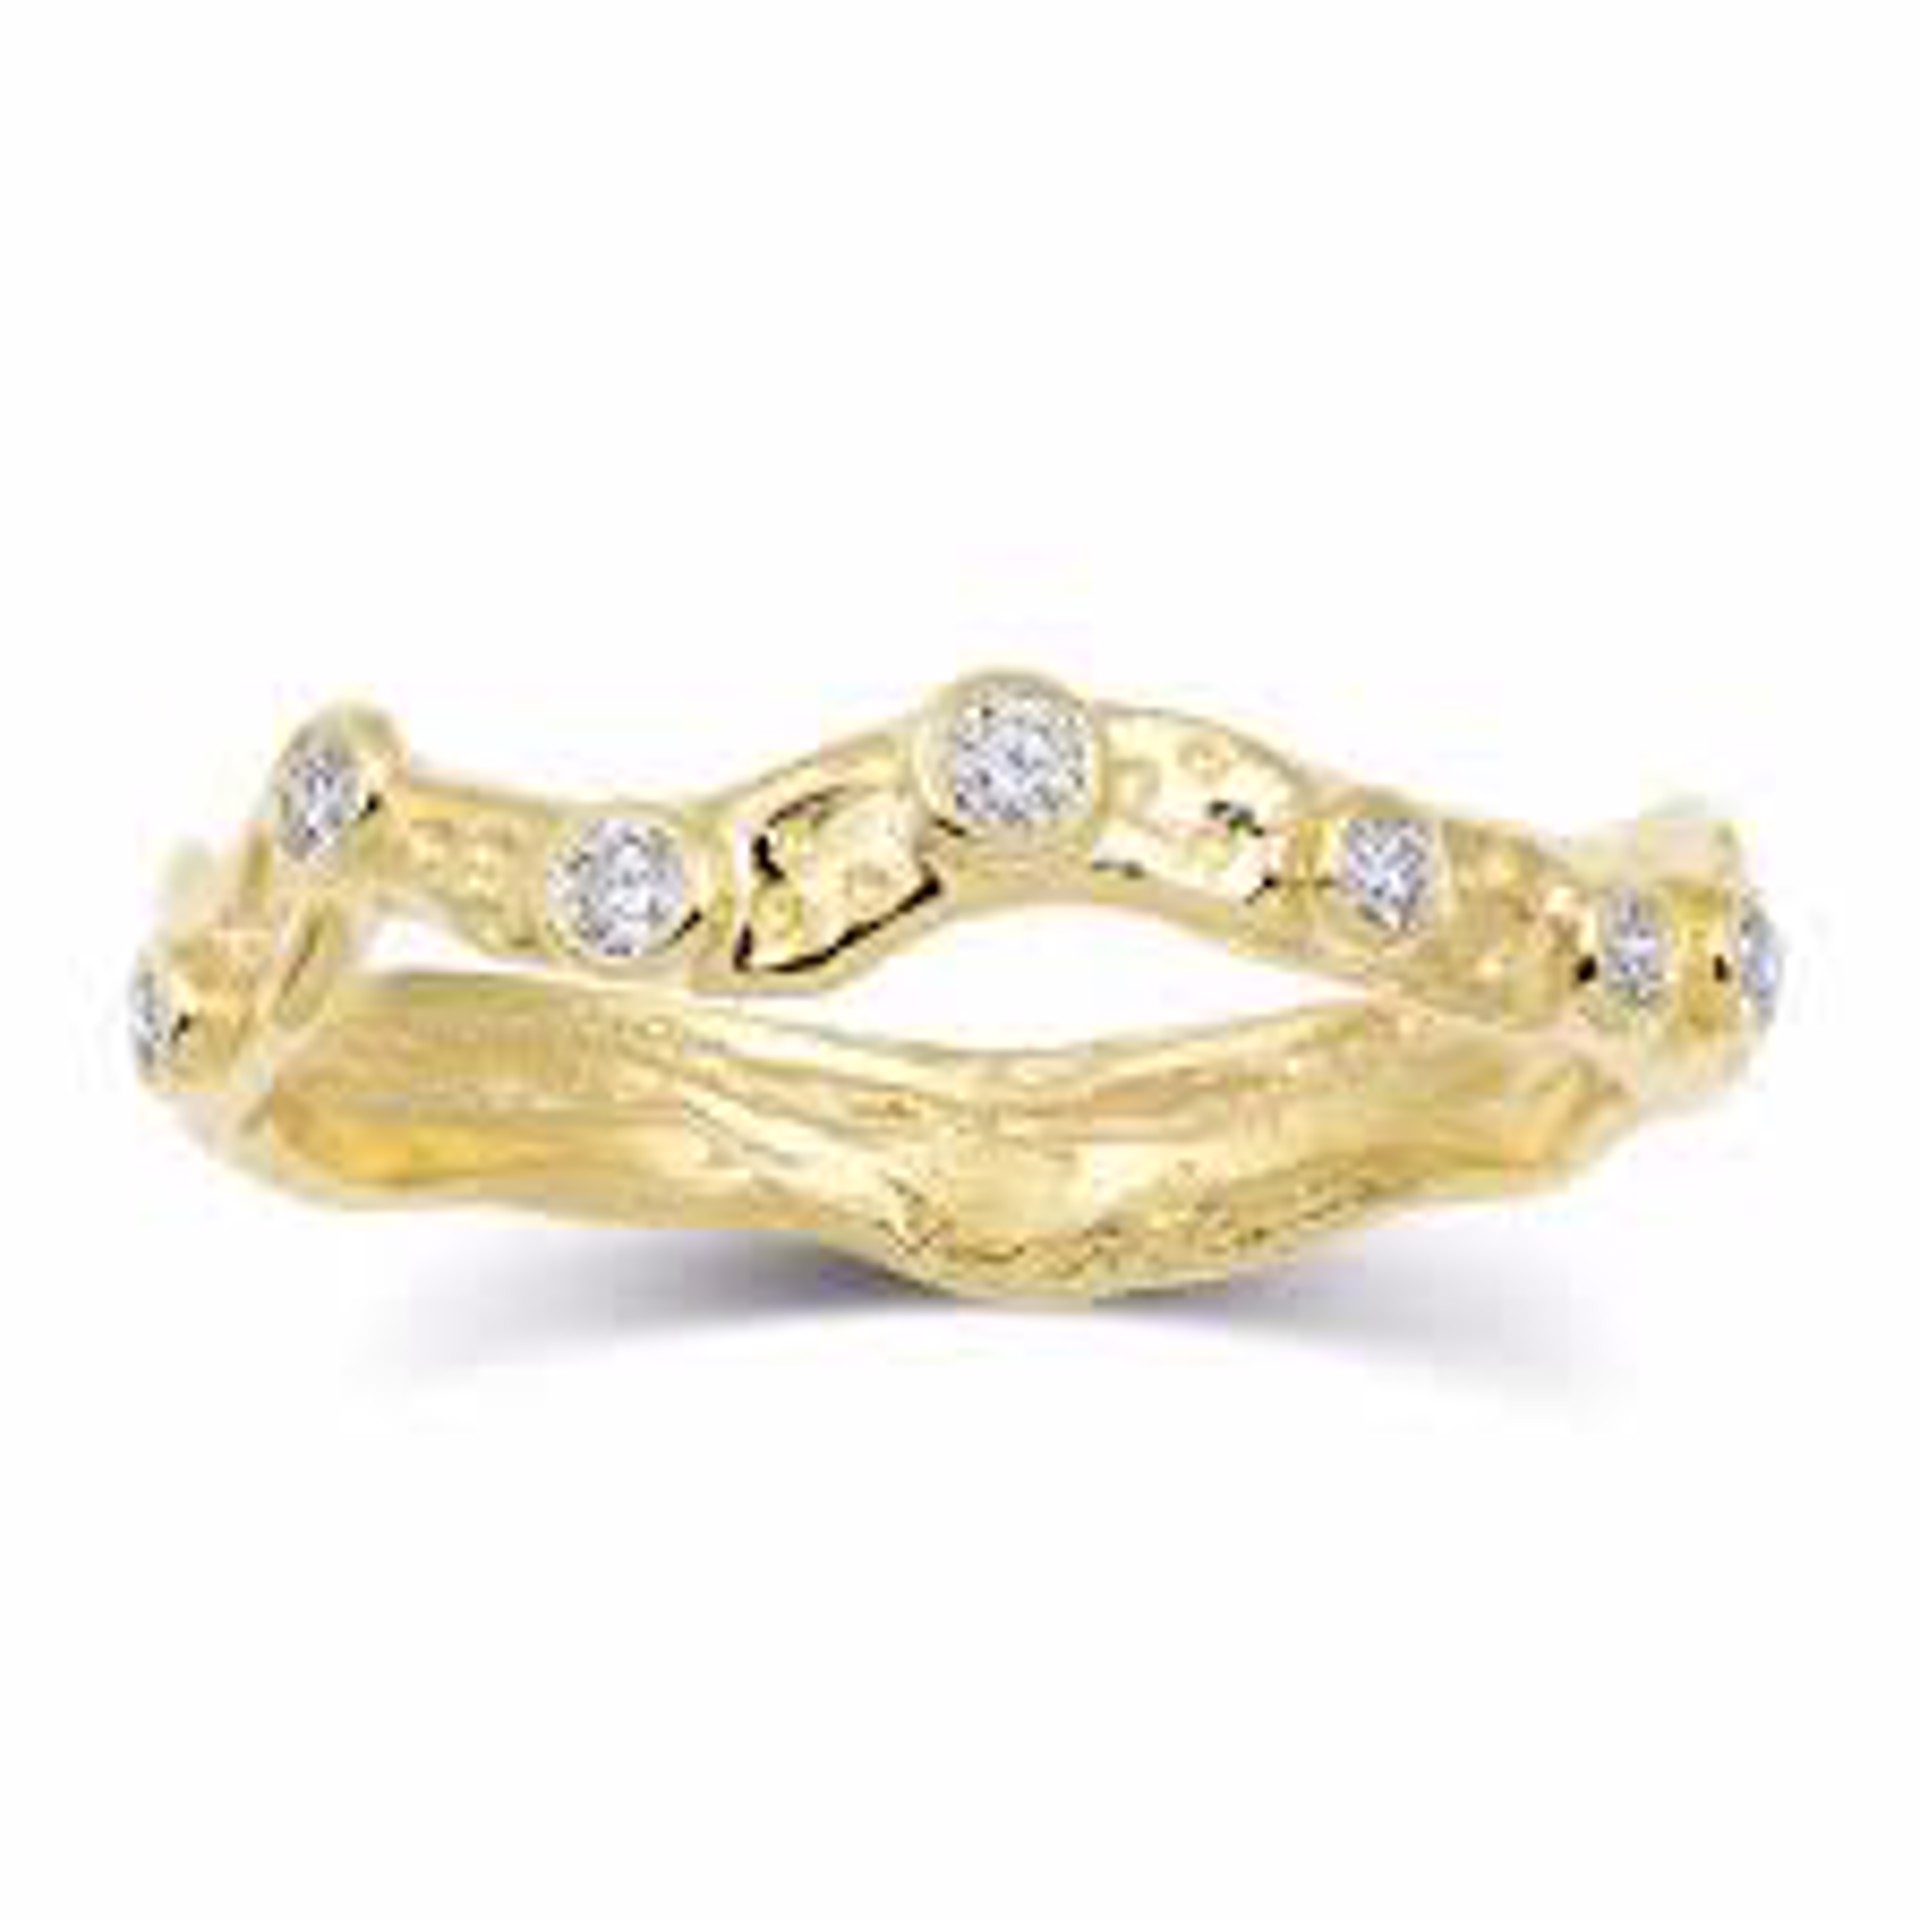 Footprints in the Sand diamond band-18K yellow gold by Kristen Baird